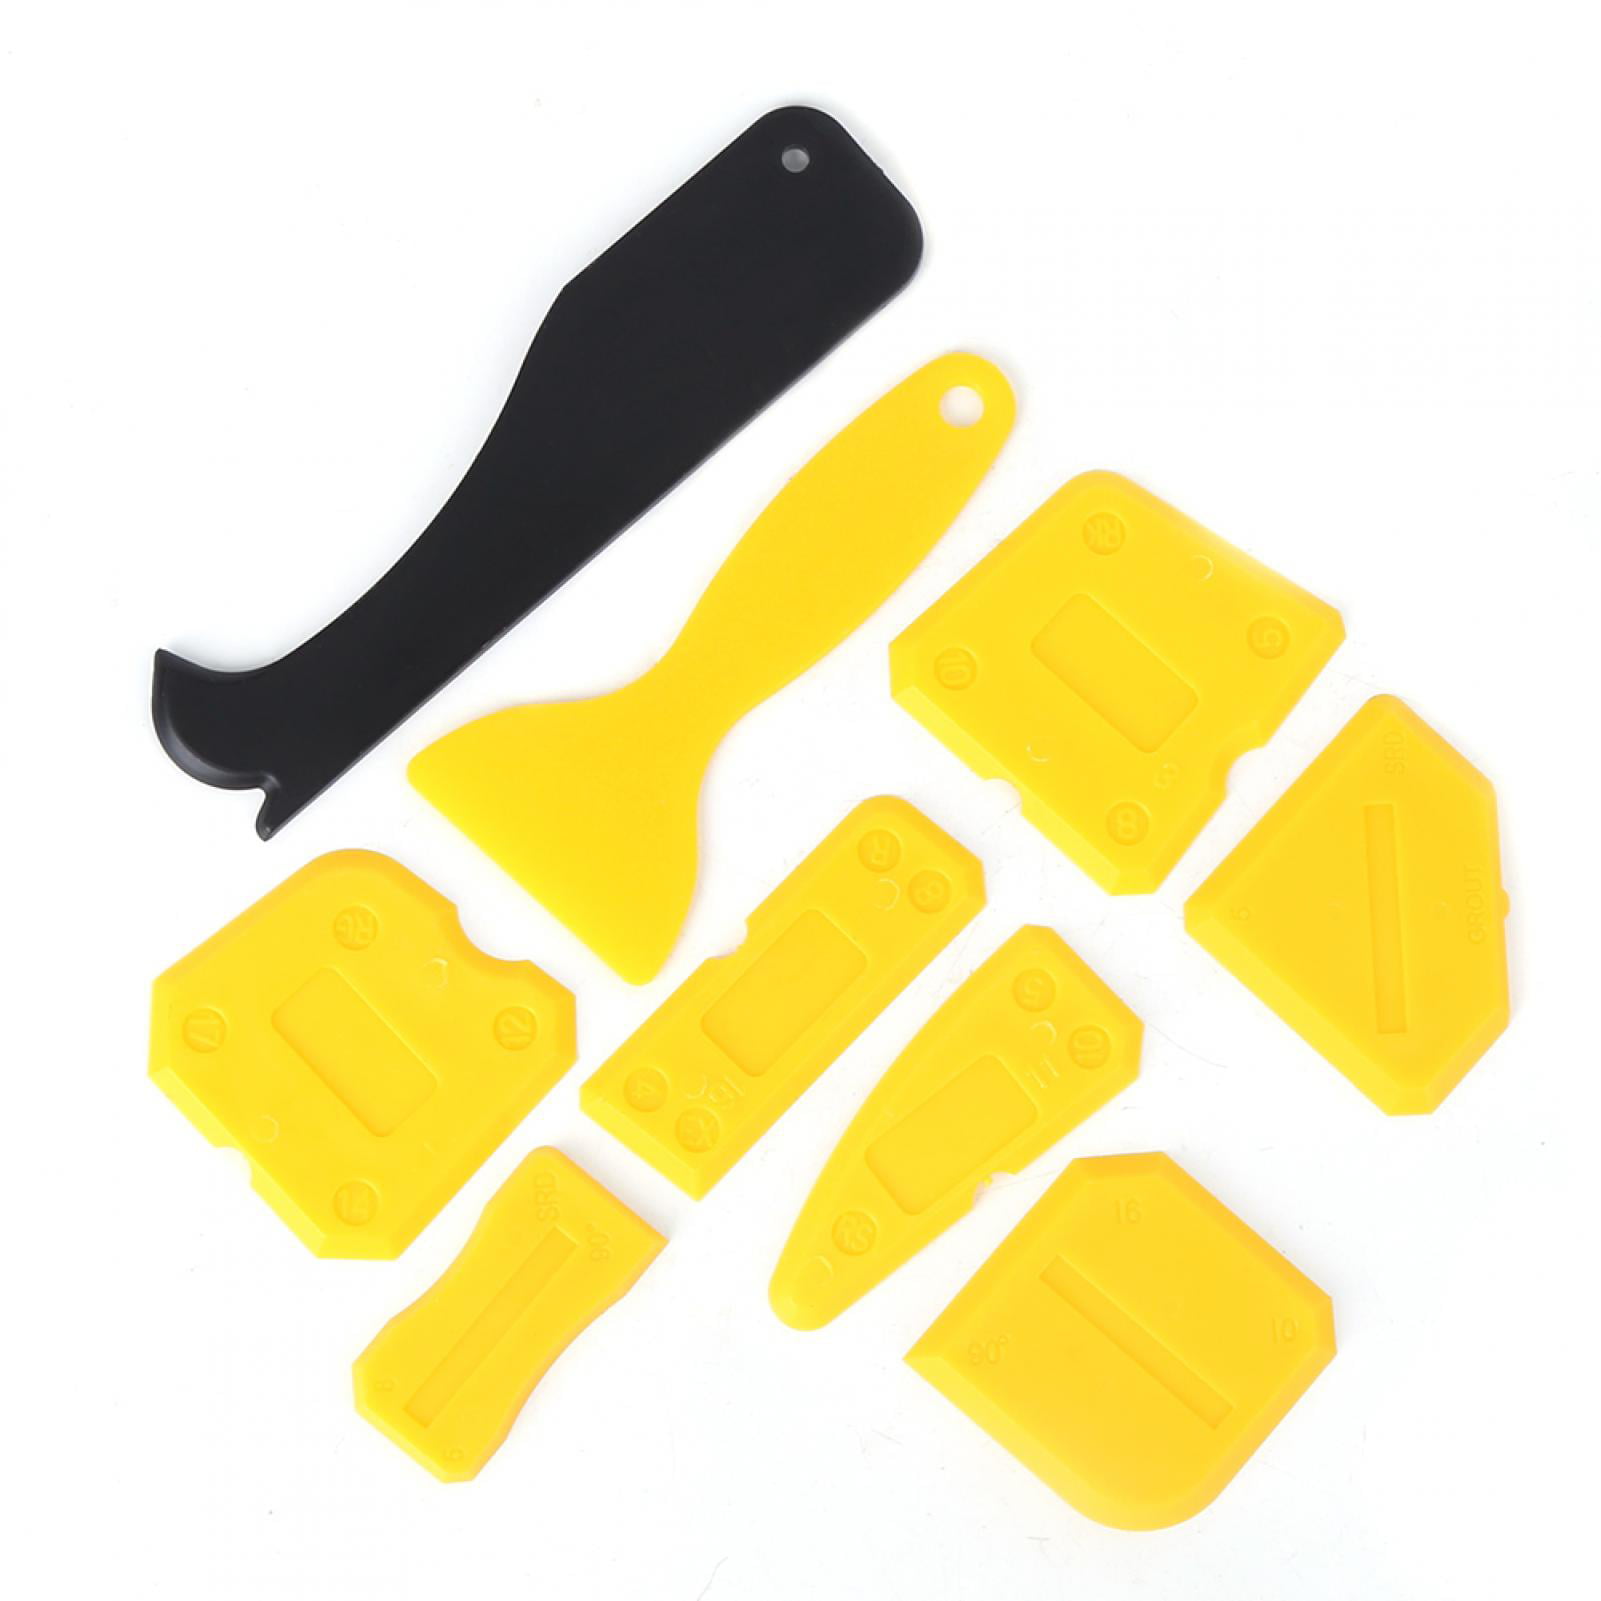 Flexible Silicone Glass Sealant Remover Caulking Tool Kit for Molding Grouting